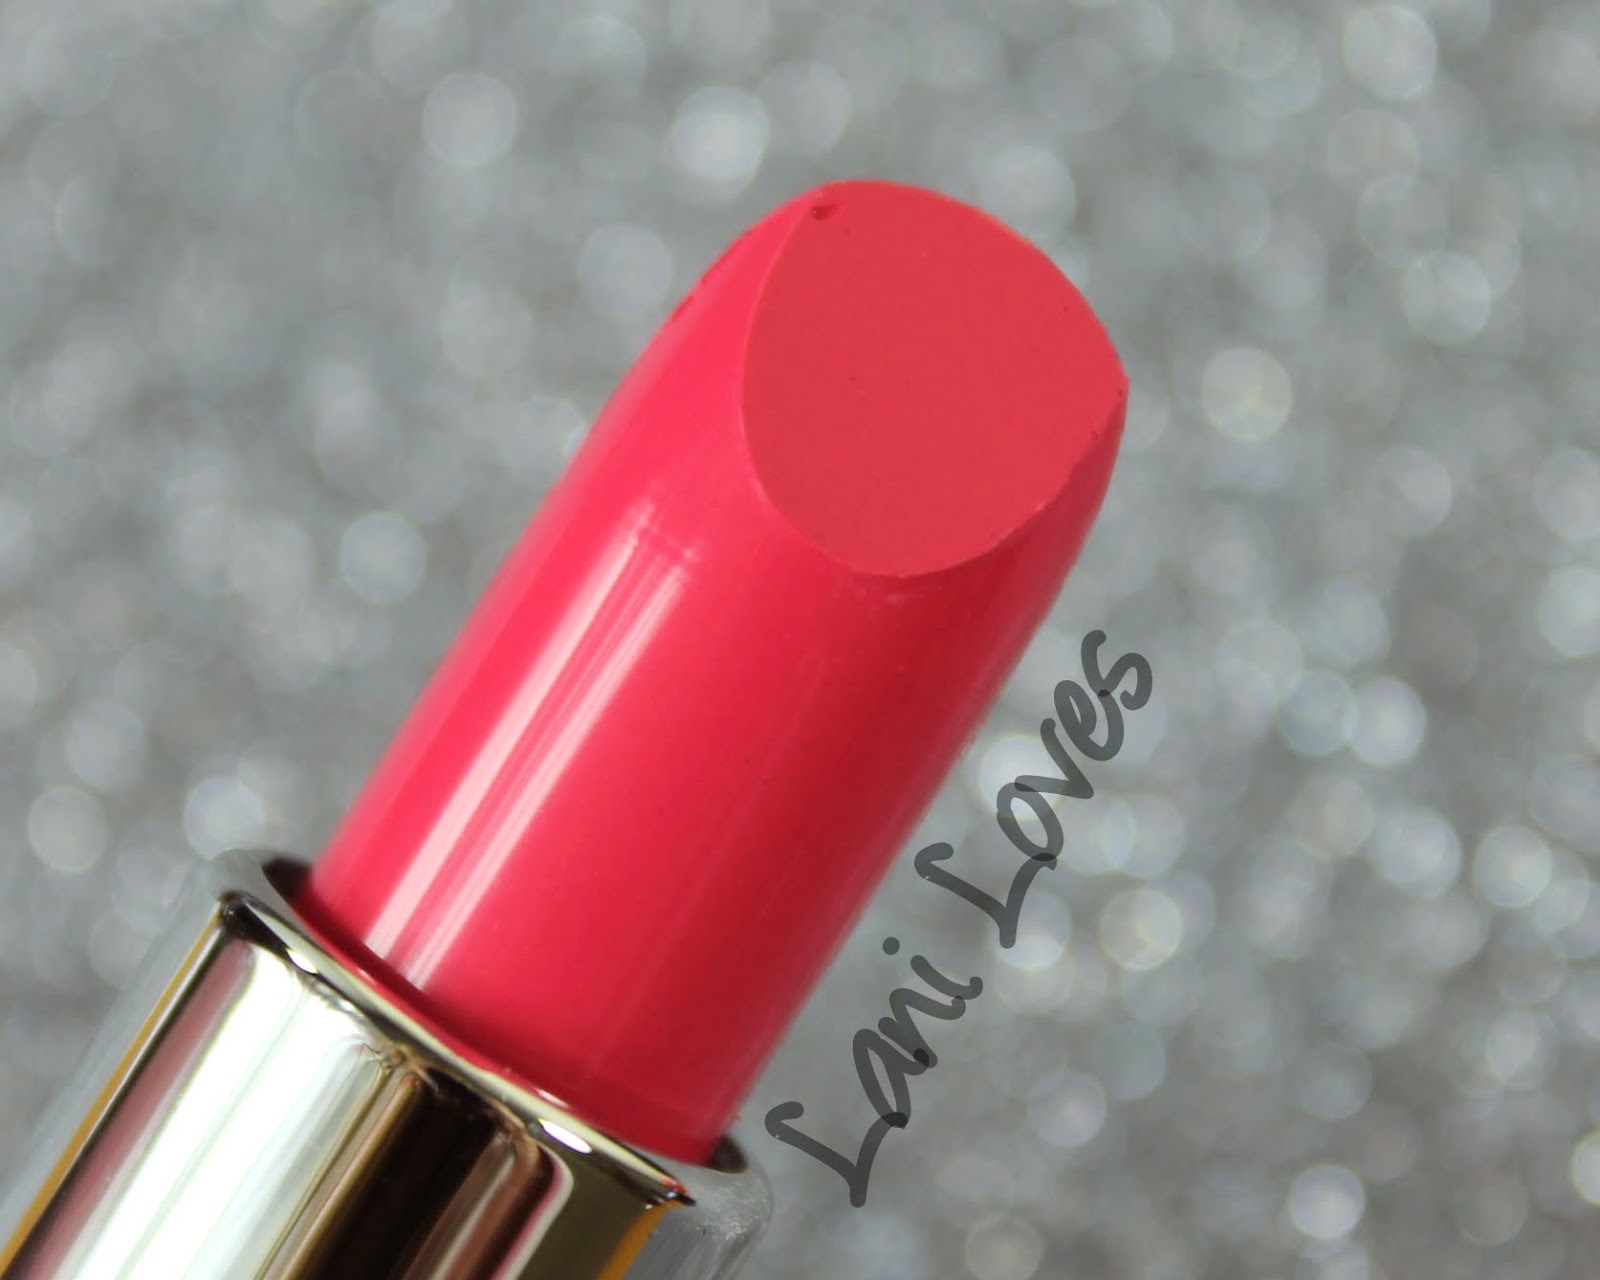 NV Colour Lipstick - Sorbet Swatches & Review